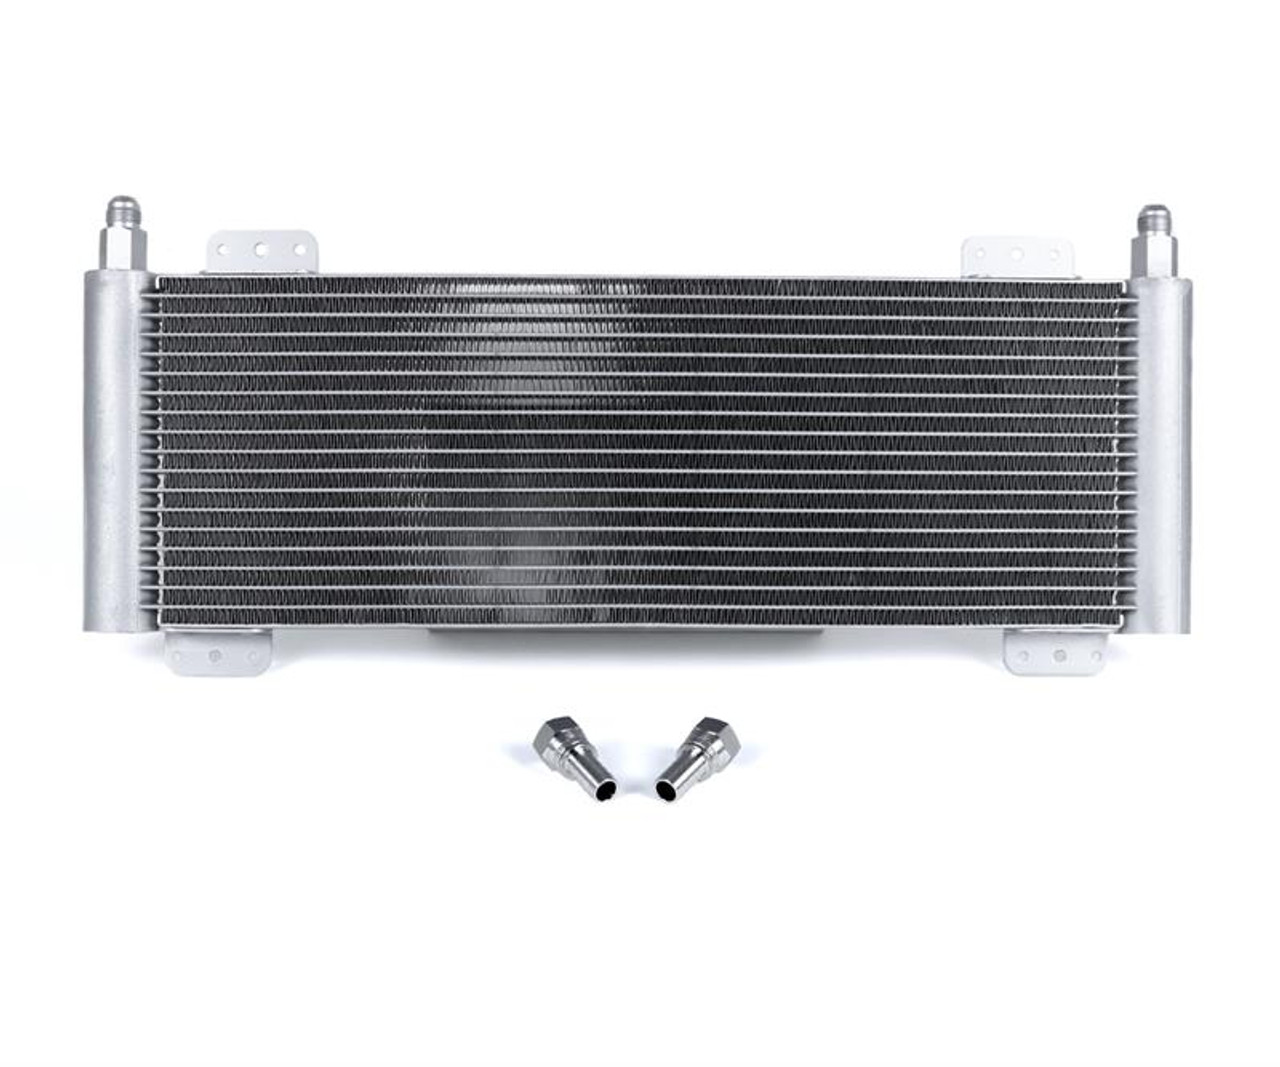  DIESELSITE 17 ROW COOLERMAX TRANSMISSION COOLER - Main View